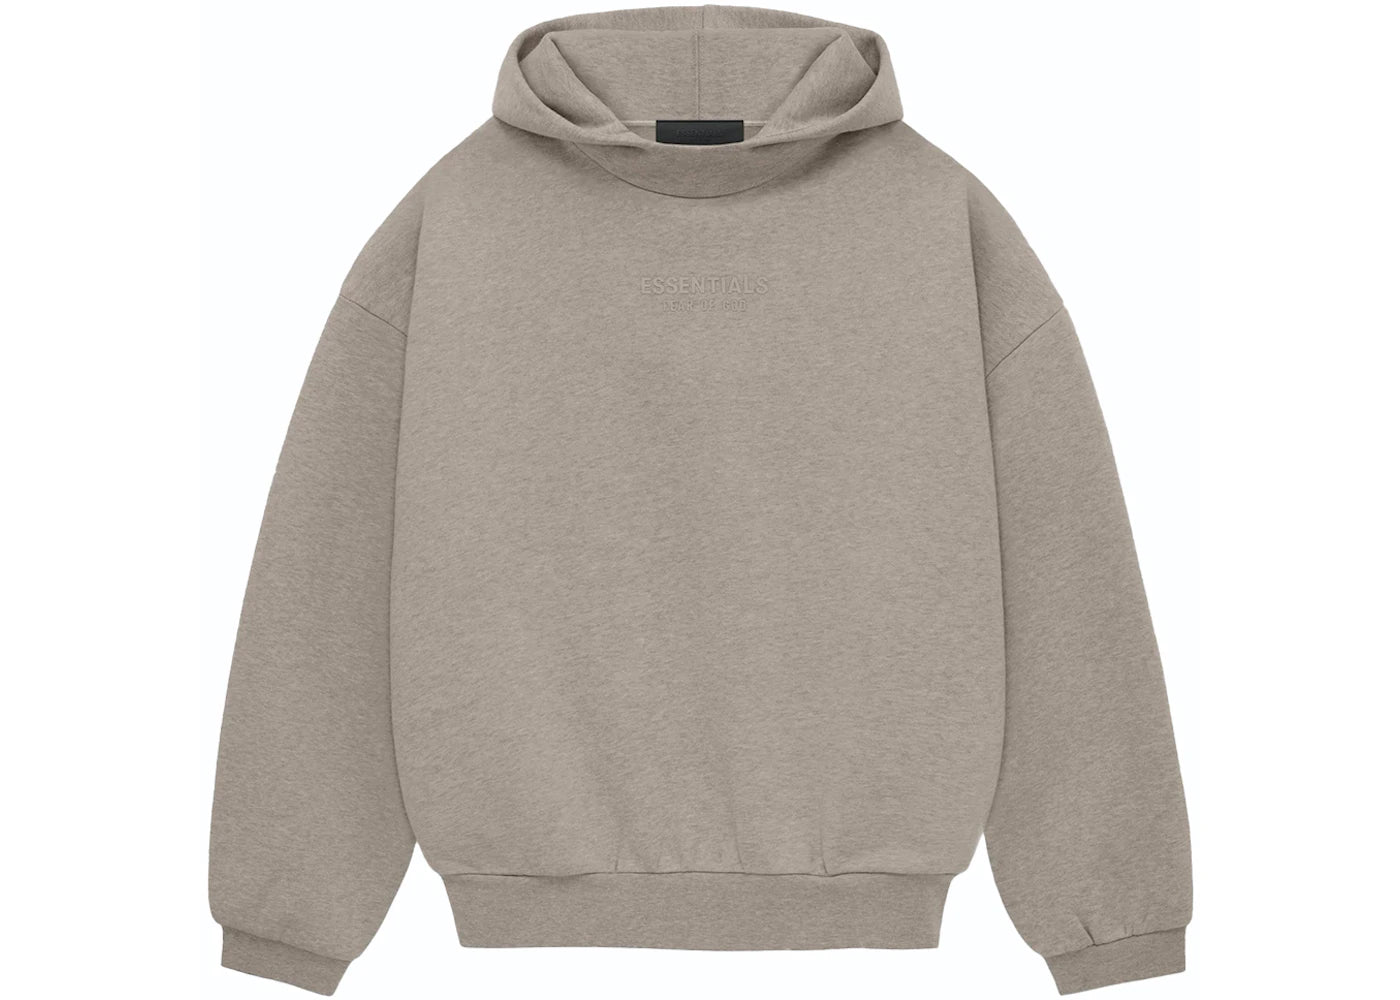 Fear of God Essentials Core Heather Hoodie